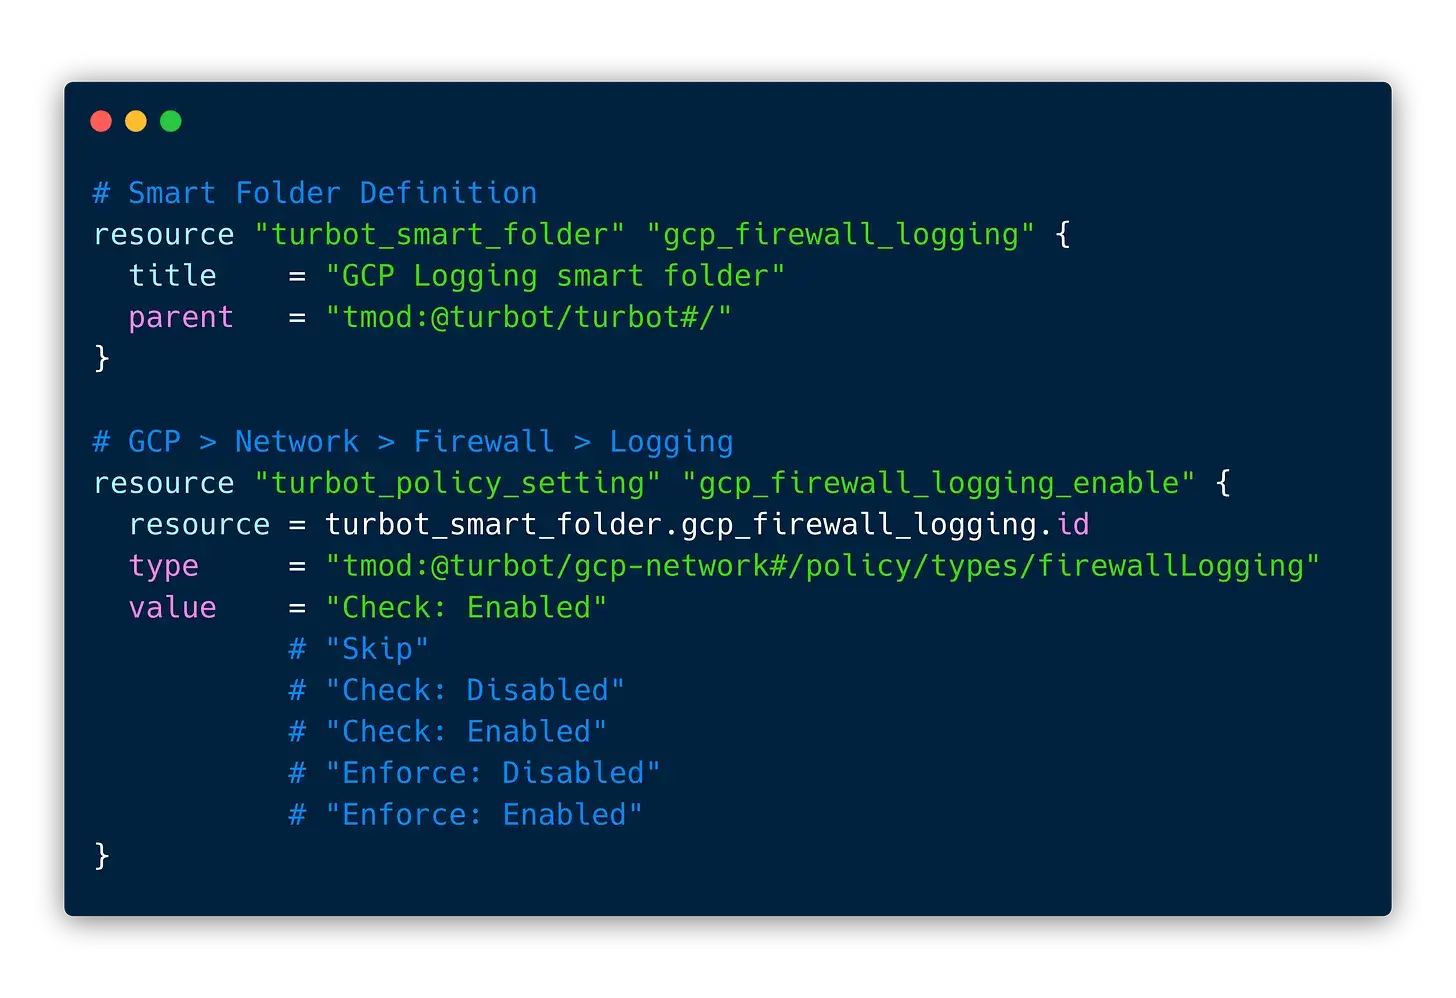 Terraform template to set the GCP > Network > Firewall > Logging policy.